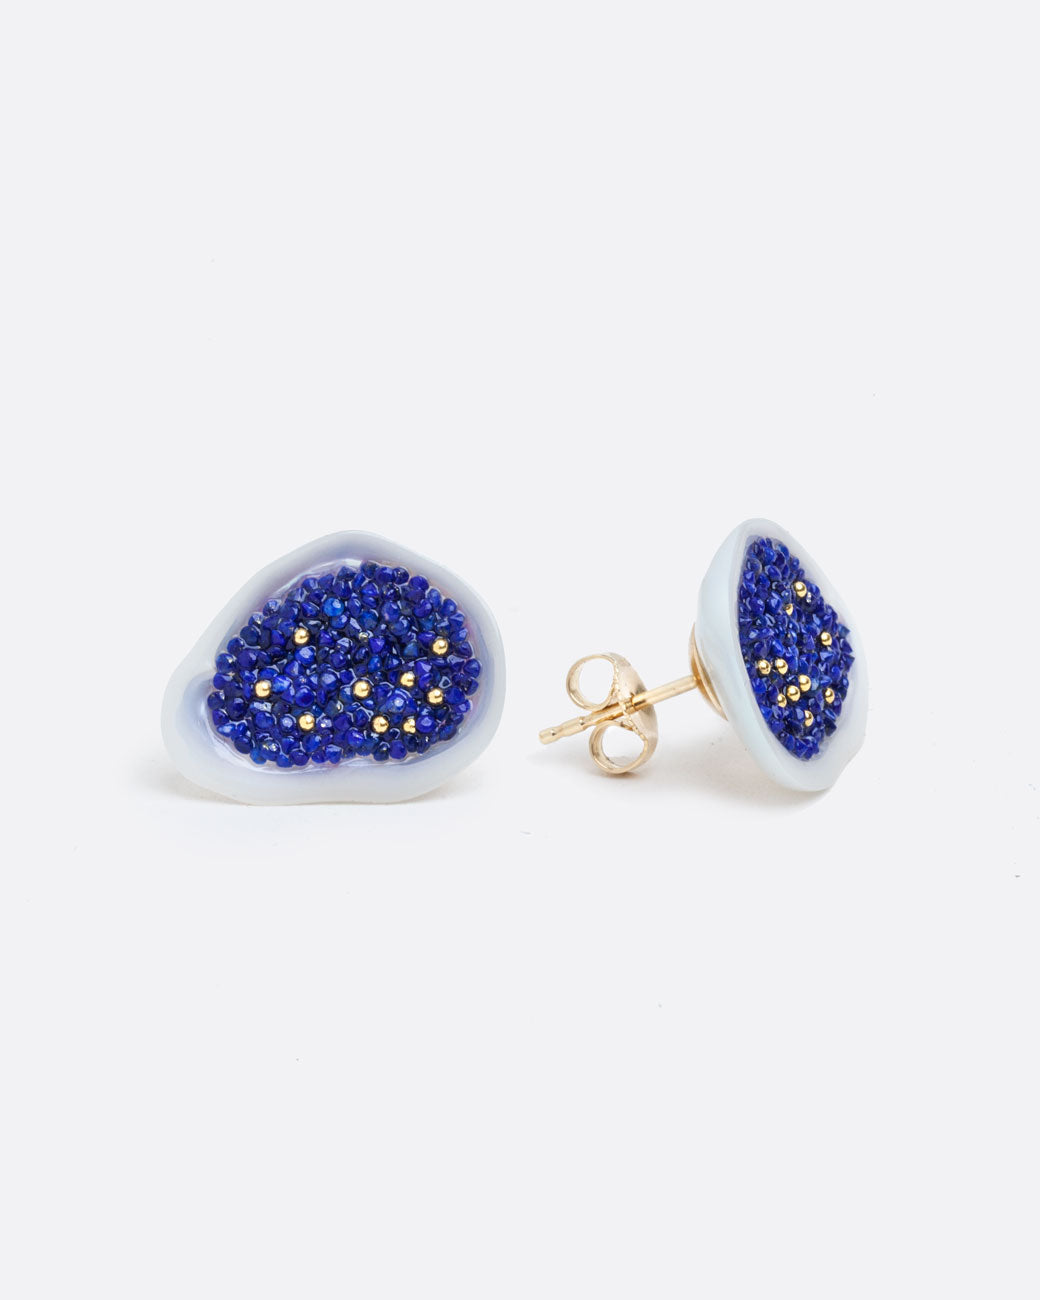 two earrings of a white souffle pearl that has been hollowed out and filled with small lapis pieces and small gold beads. with a yellow gold post back and yellow gold butterfly backing